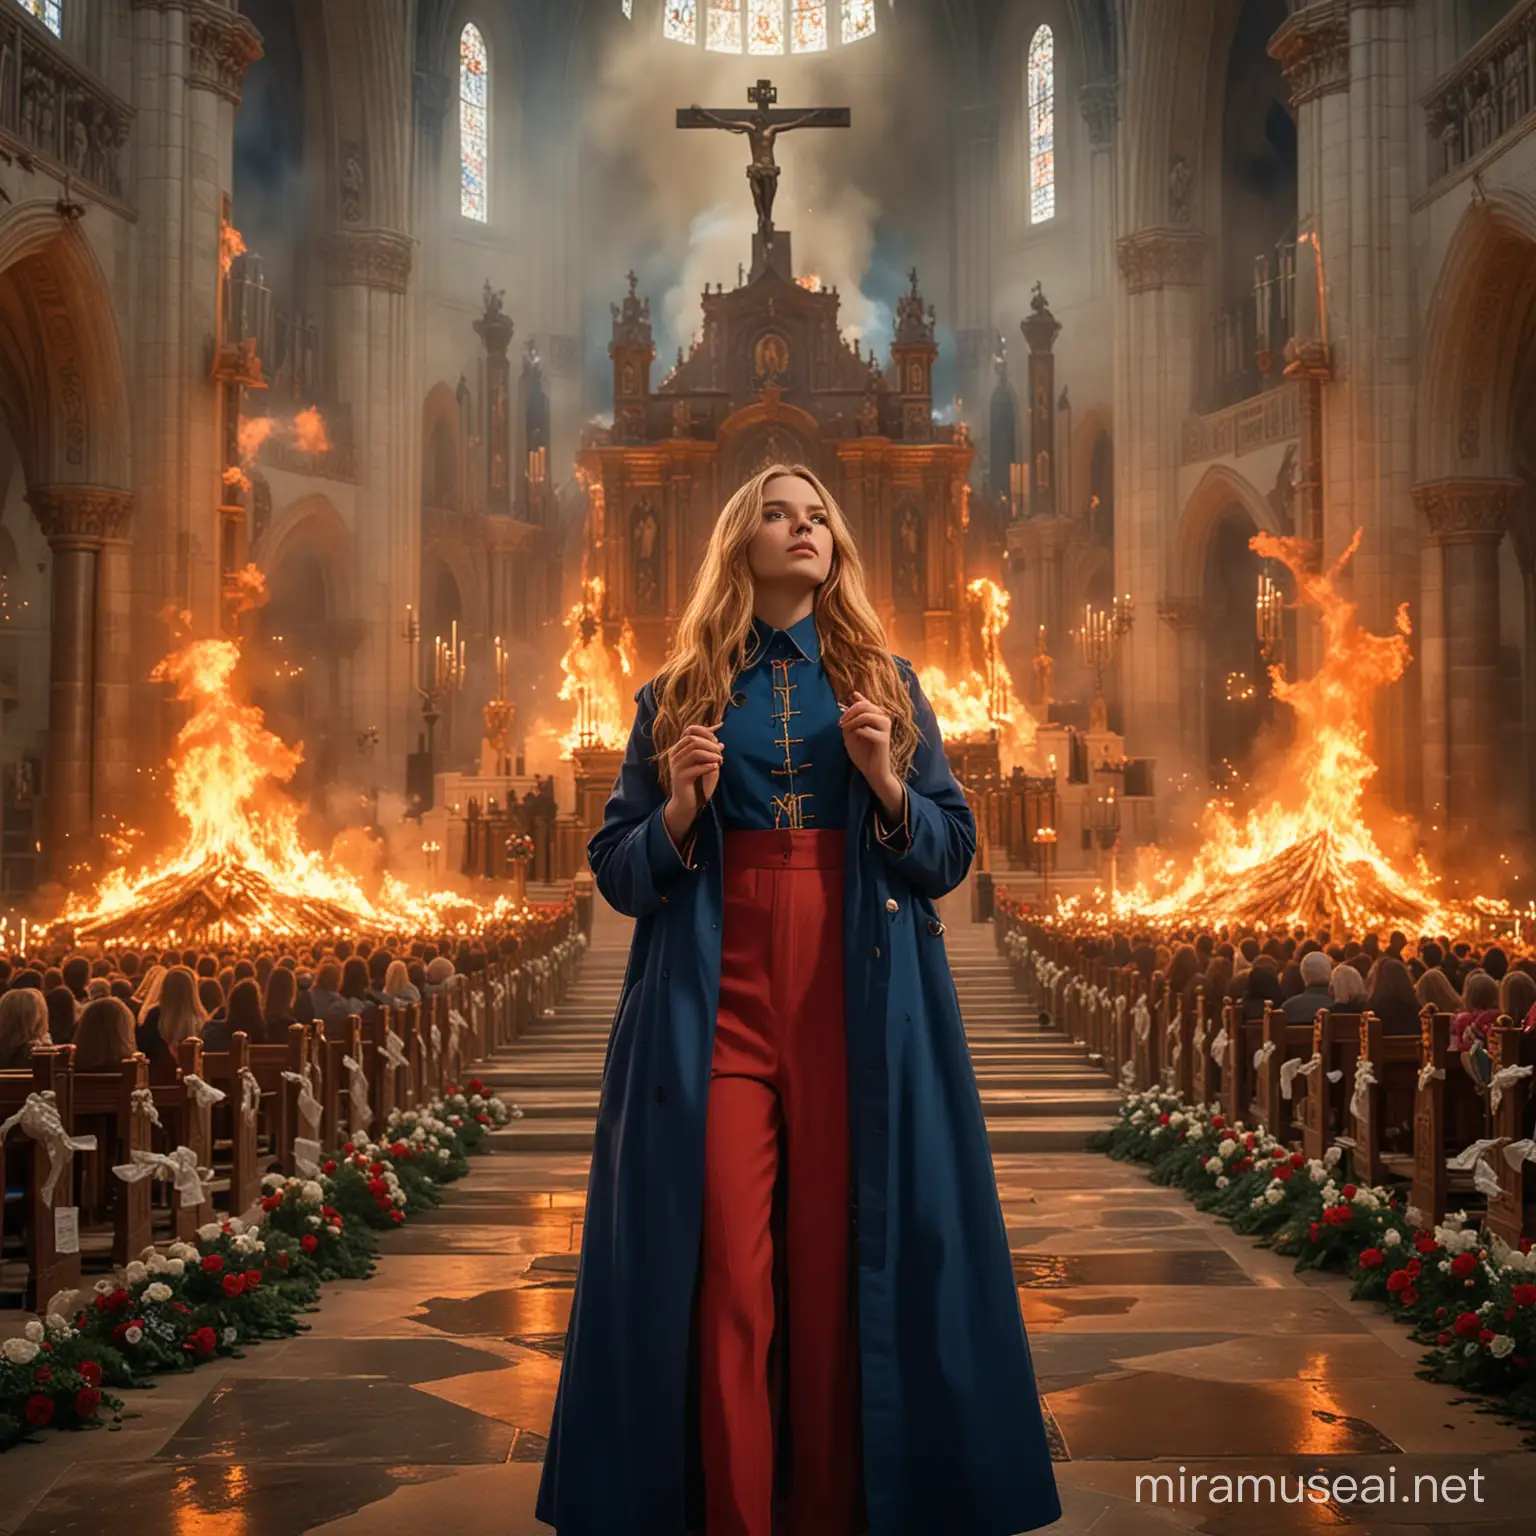 Mystical Teenage Empress Rebeca Surrounded by Flames in Cathedral